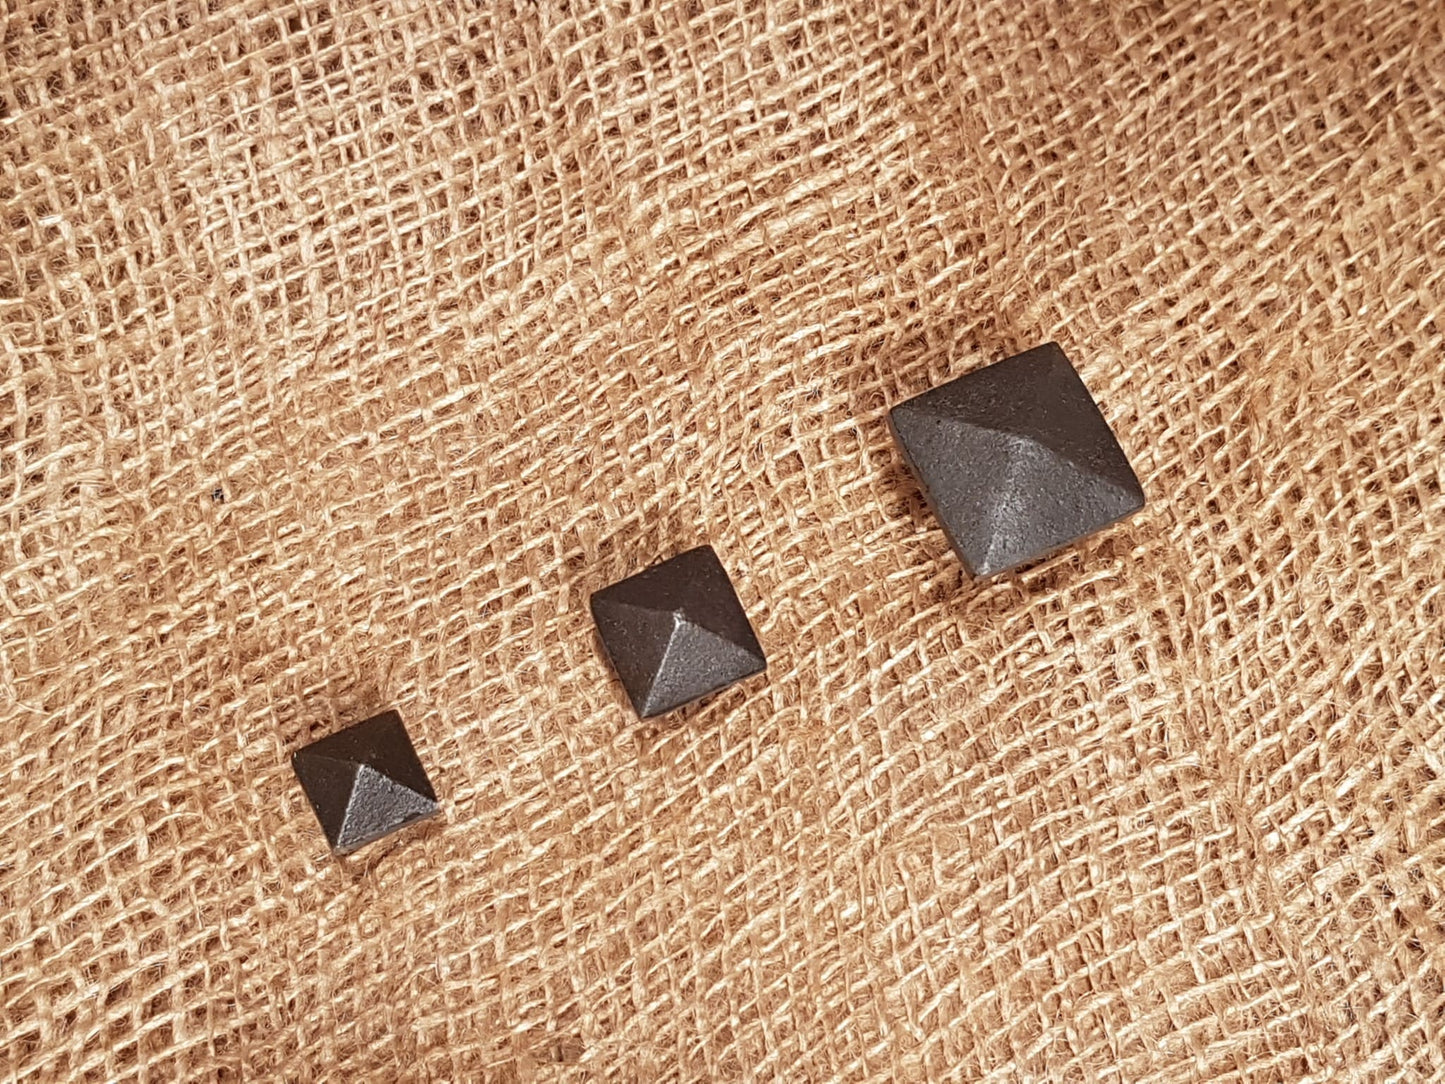 Square Pyramid Stud - Small 1/2" - Spearhead Collection - Nails – Spikes – Studs - Hardware, Millwork Hardware, Nails, Studs